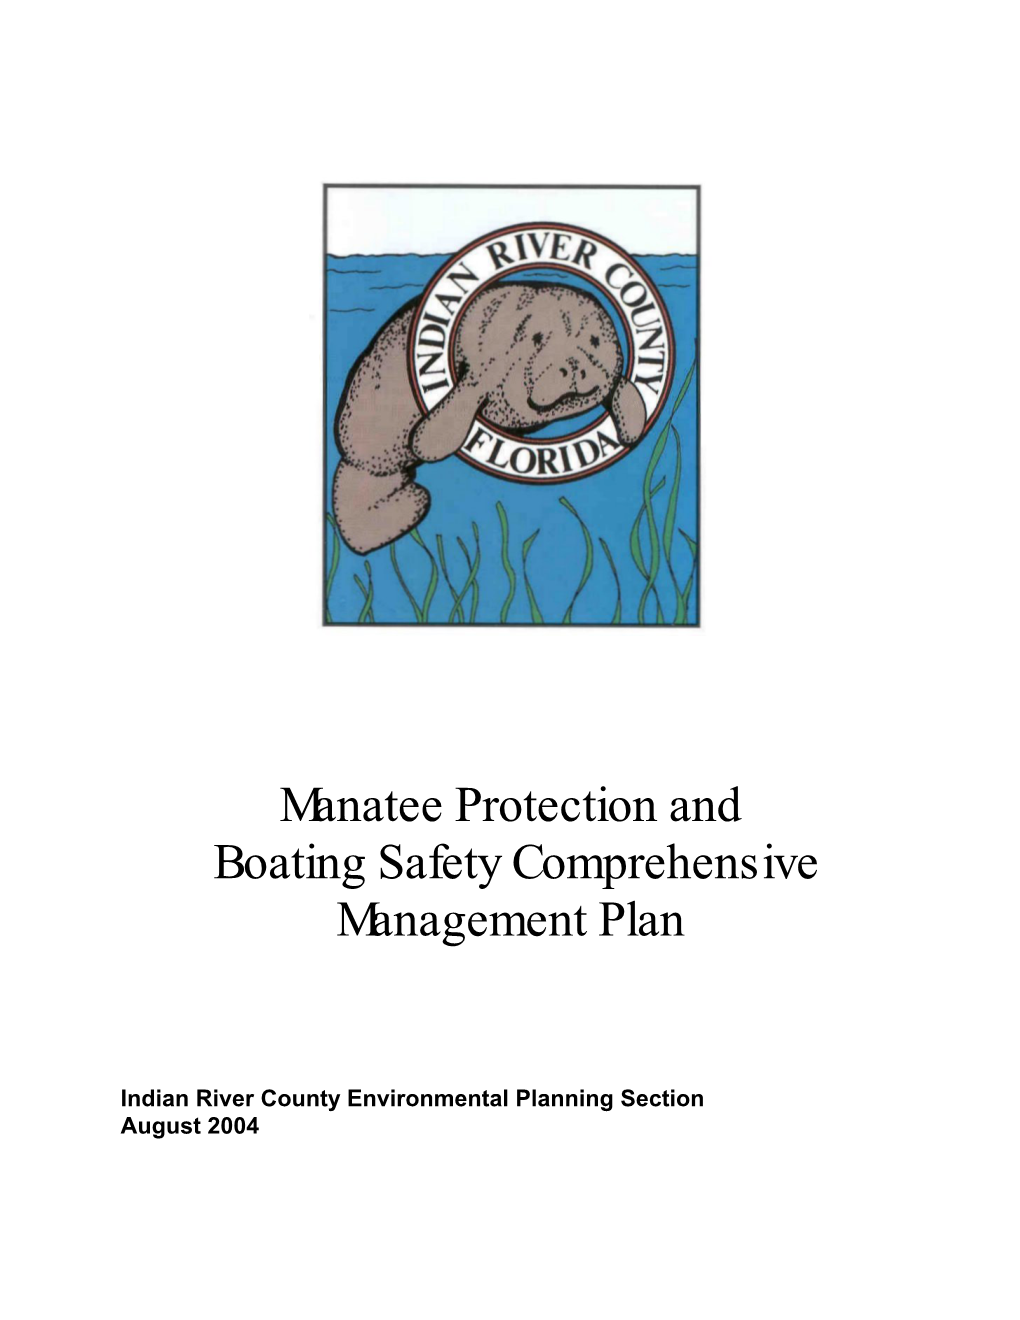 Indian River County, Manatee Protection Plan